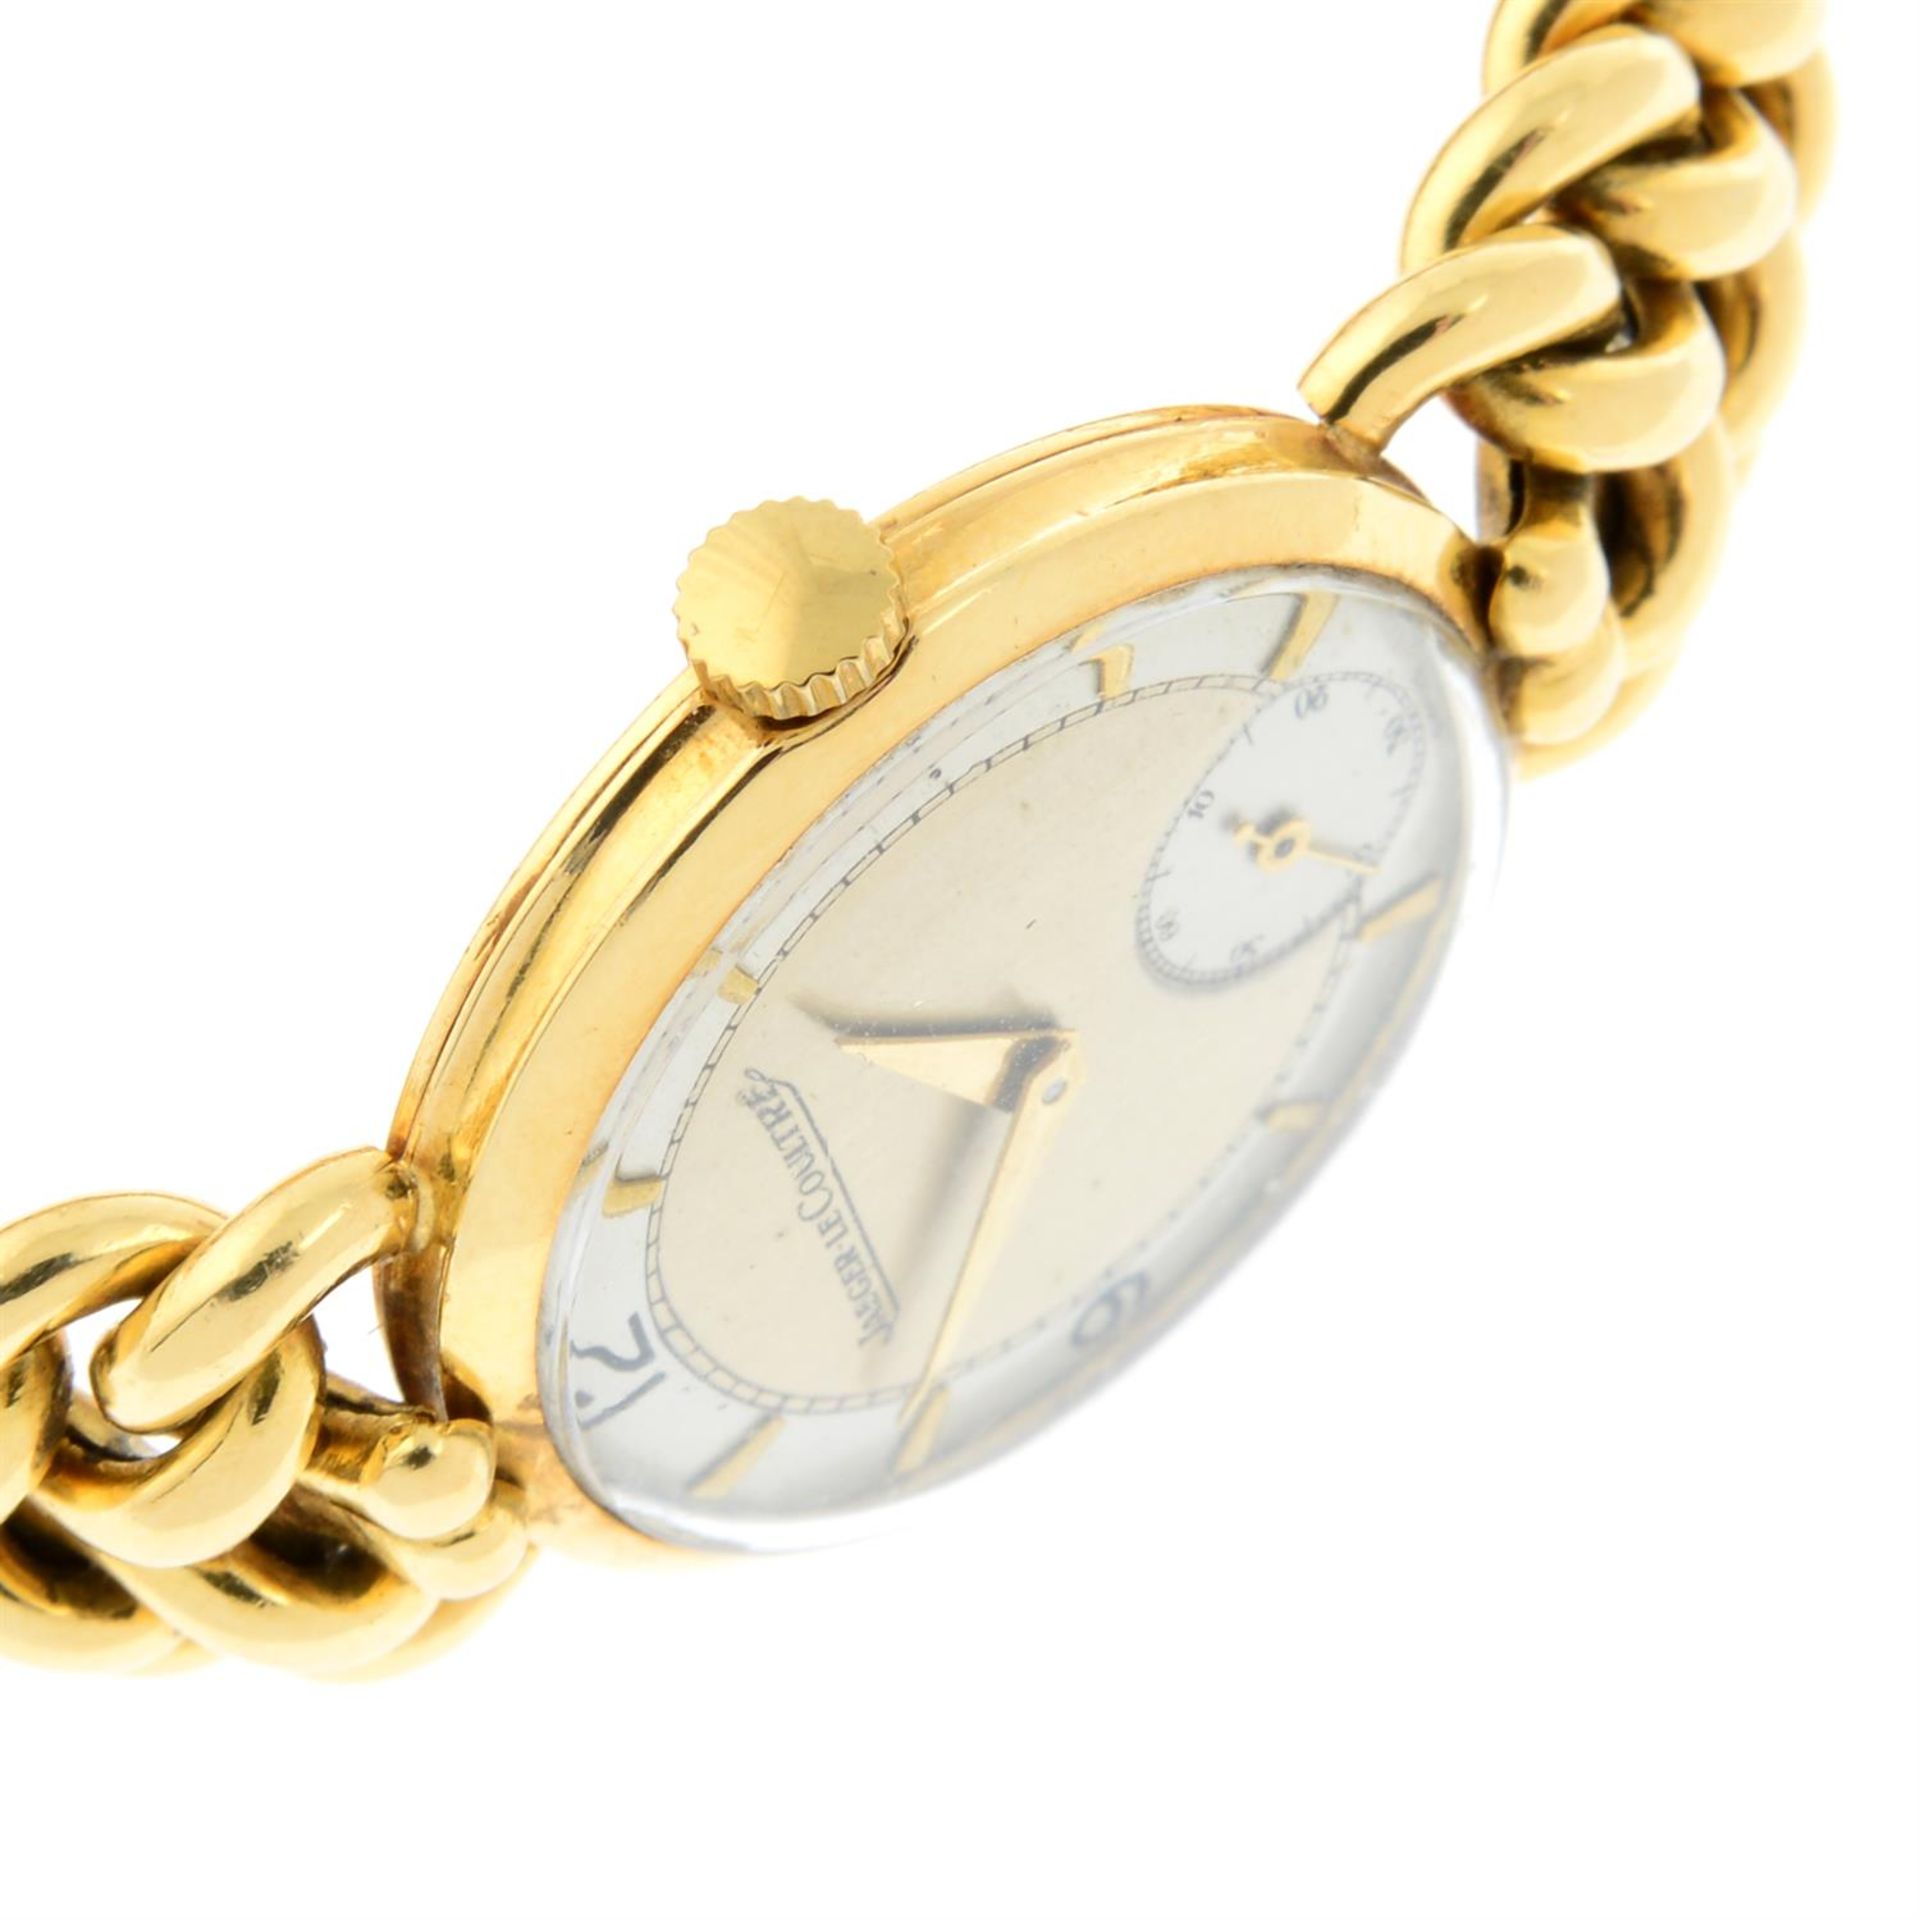 JAEGER-LECOULTRE - a yellow metal bracelet watch, 25mm. - Image 3 of 5